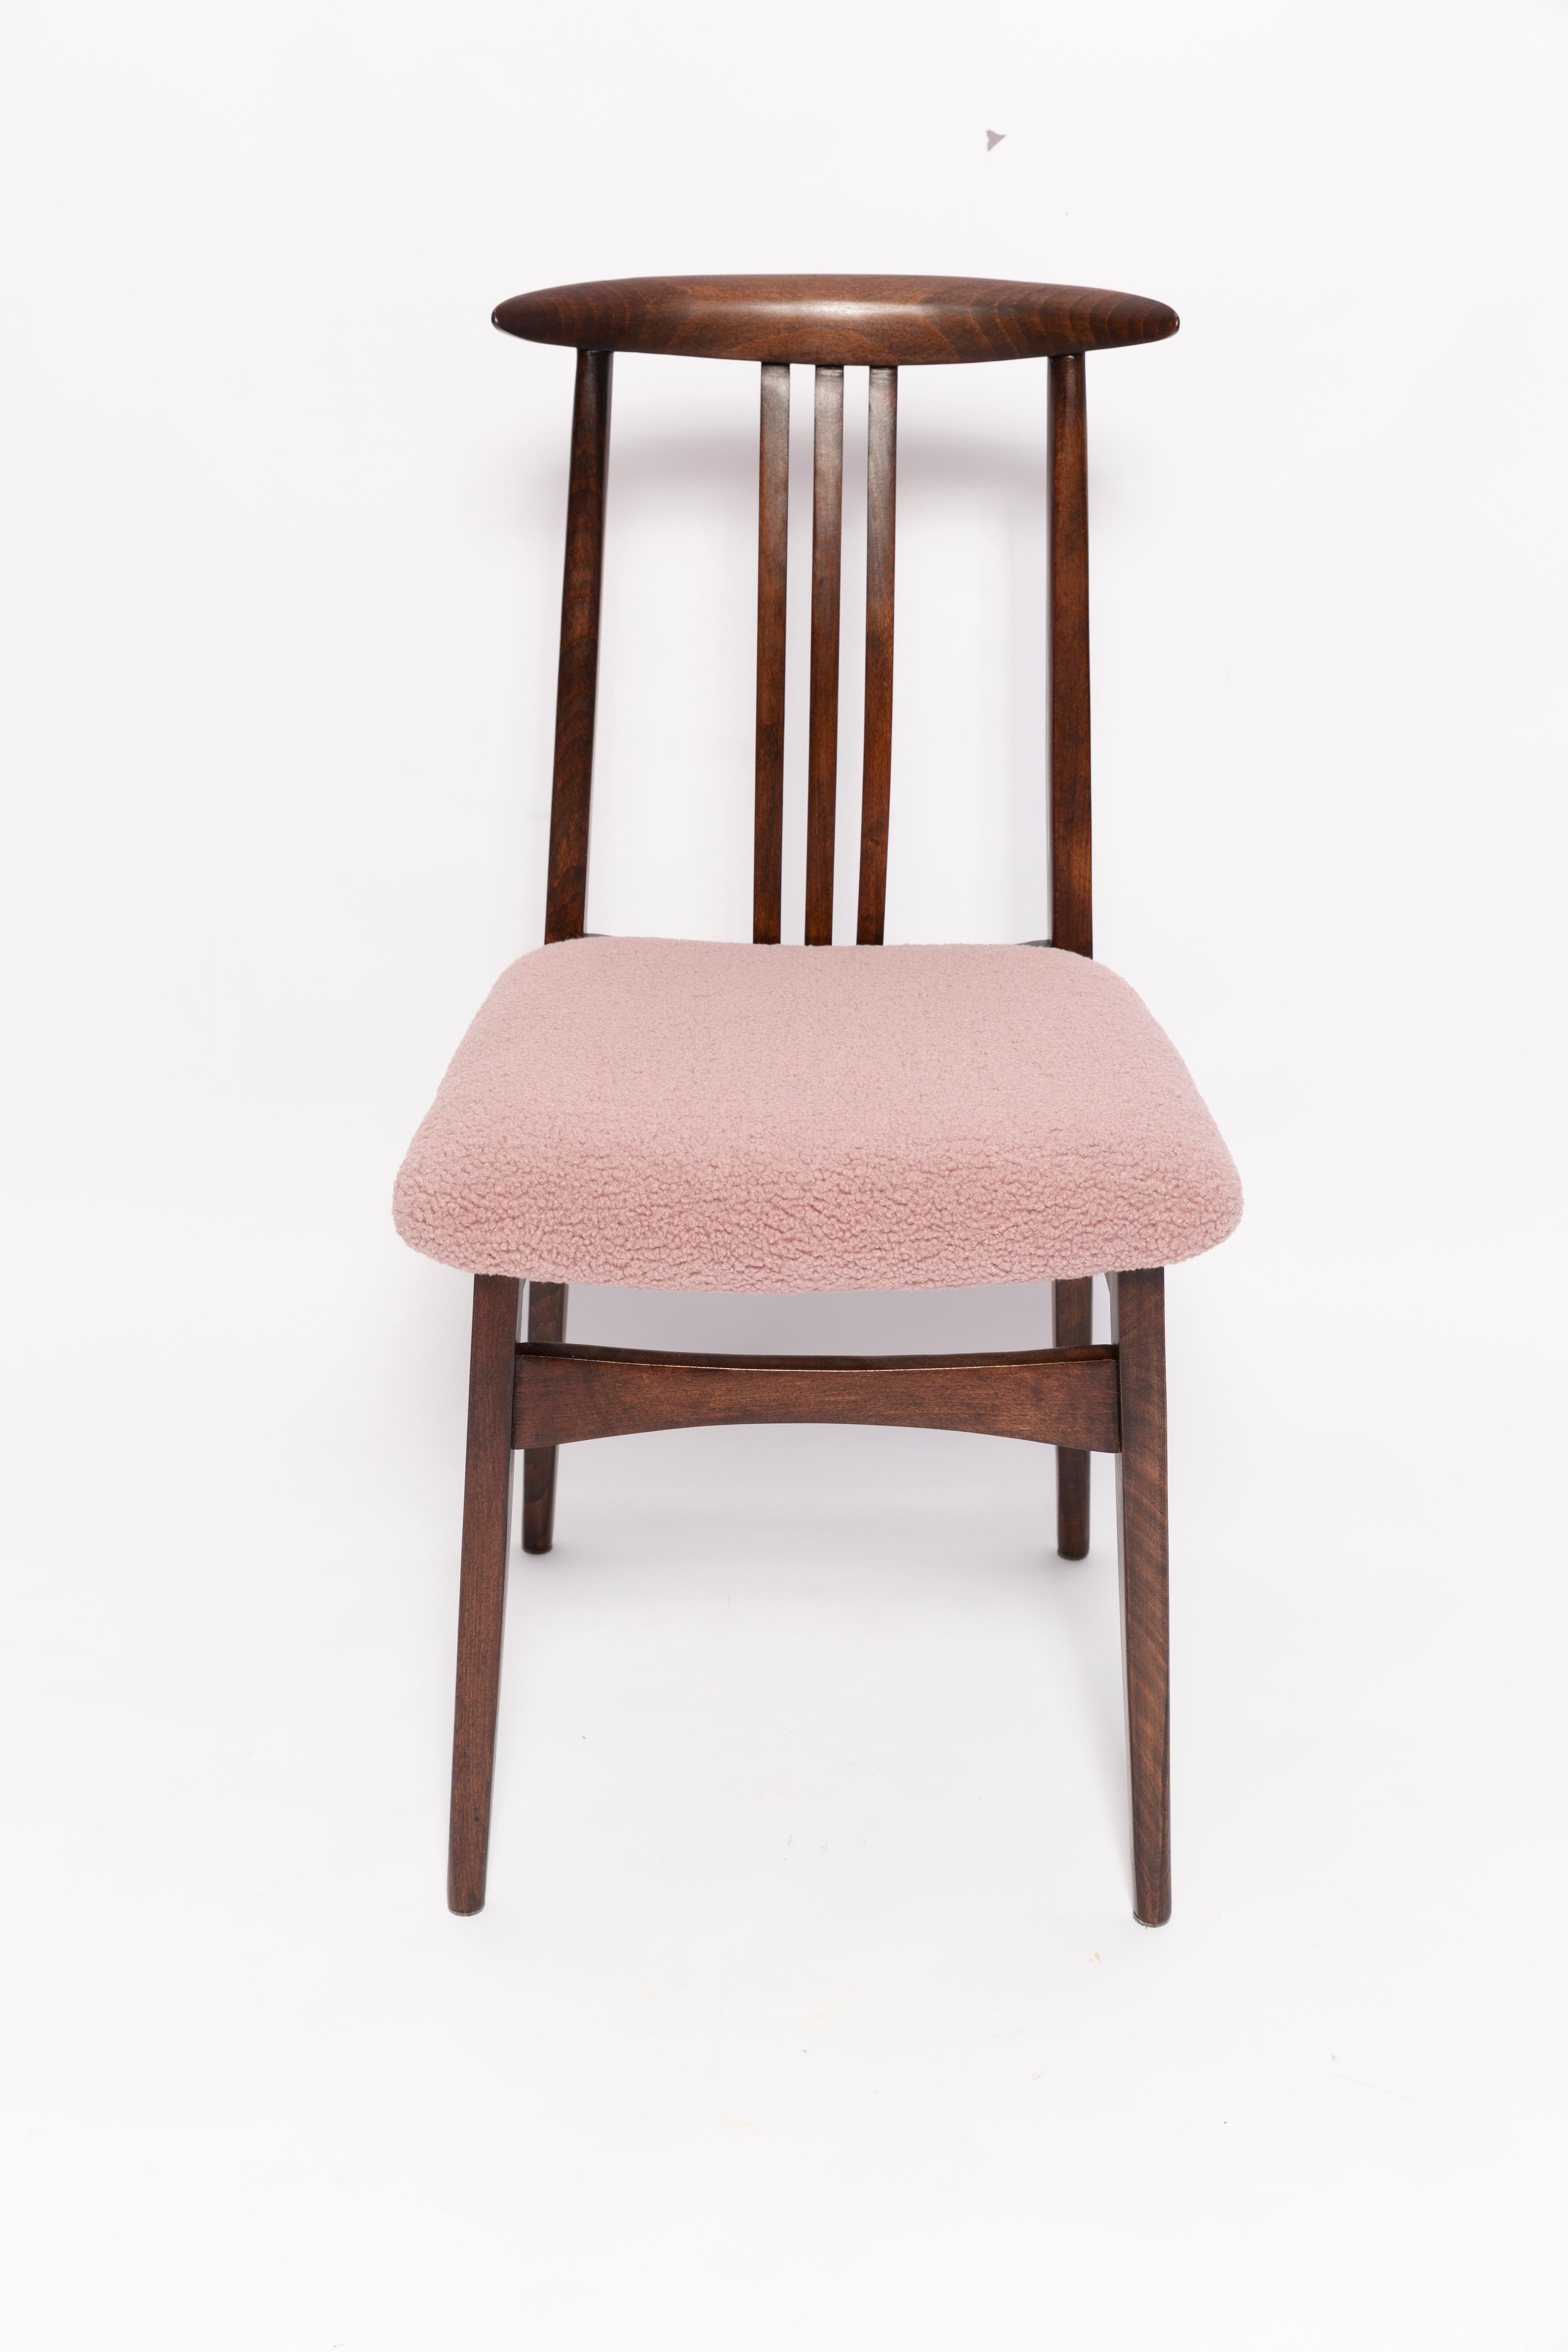 Polish Mid-Century Pink Blush Boucle Chair, Walnut Wood, by M. Zielinski, Europe, 1960s For Sale